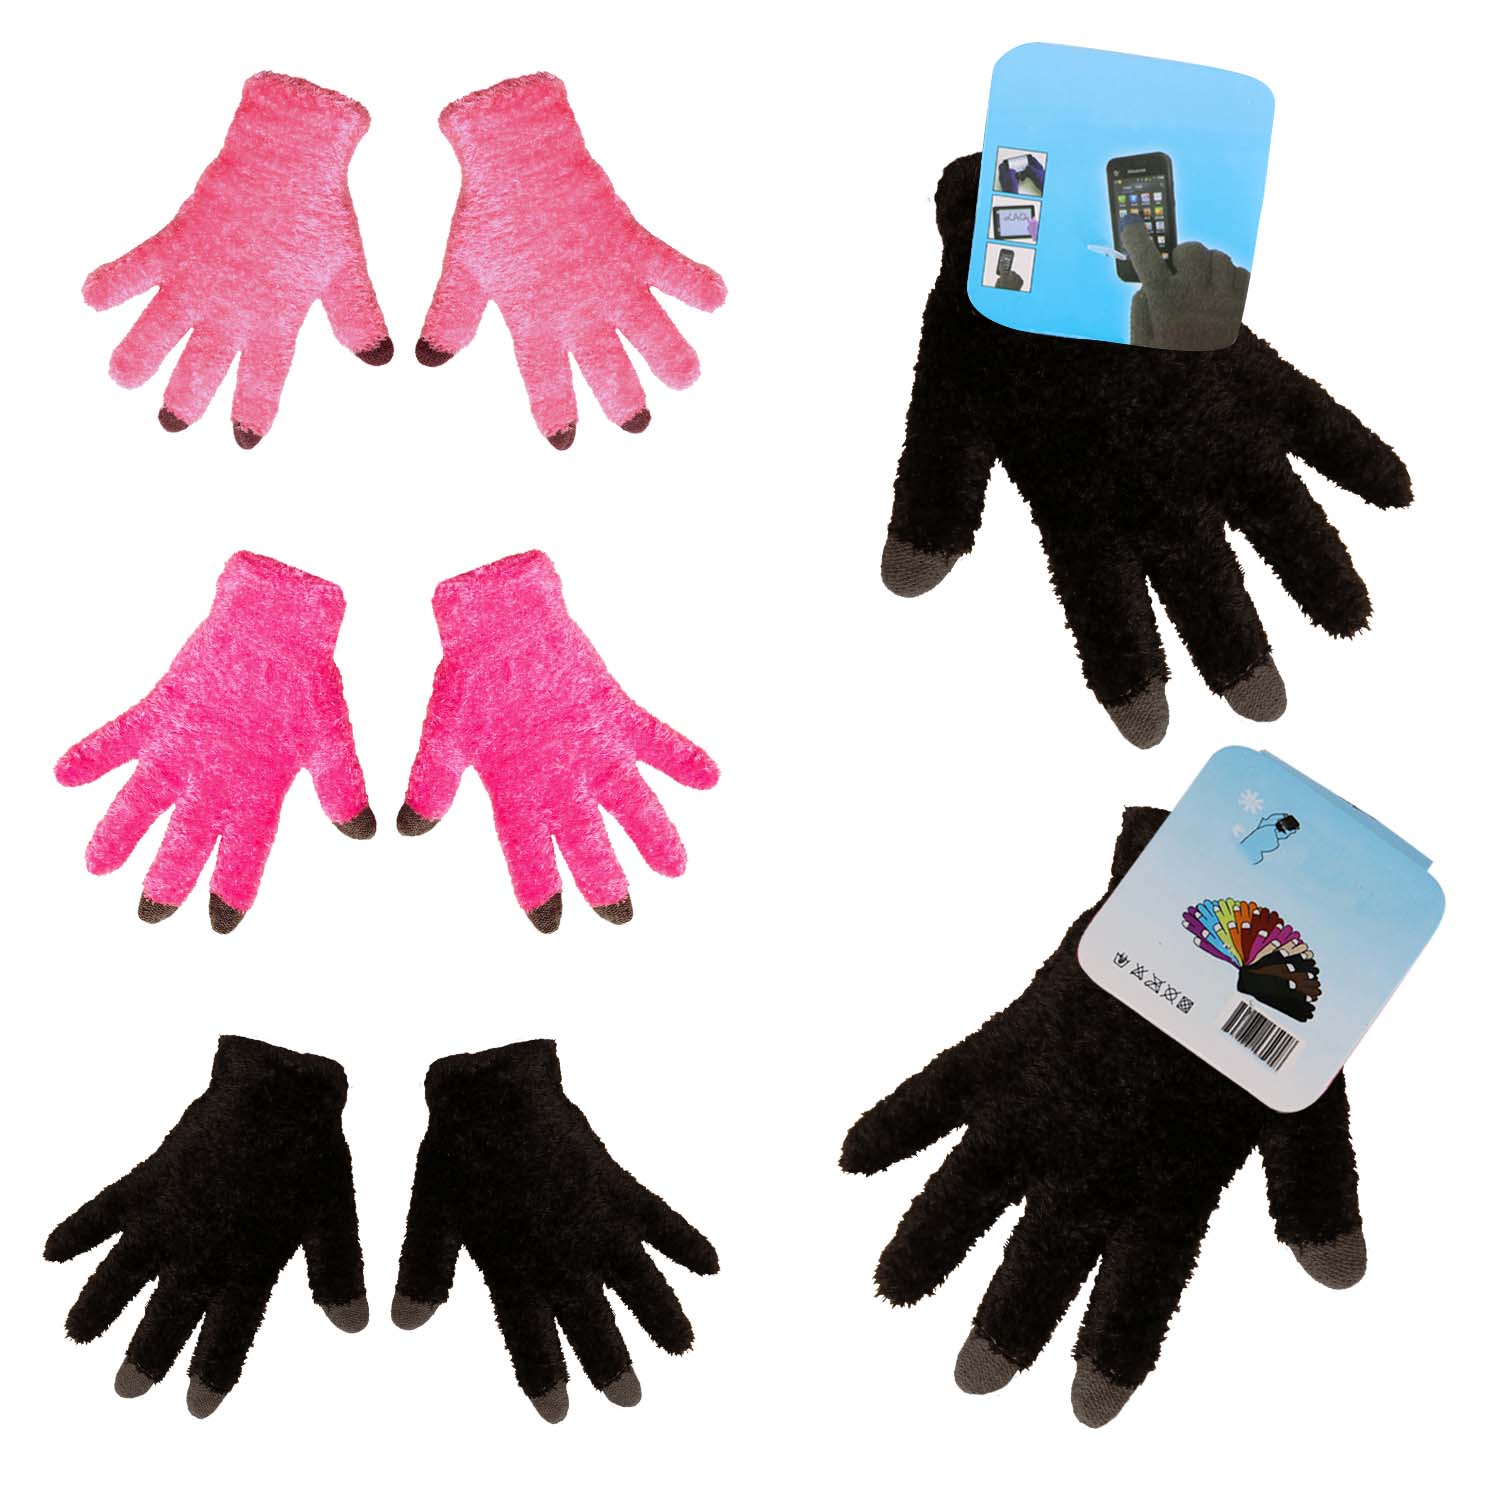 Unisex Wholesale Touch Gloves in 3 Assorted Colors - Bulk Case of 96 Pairs